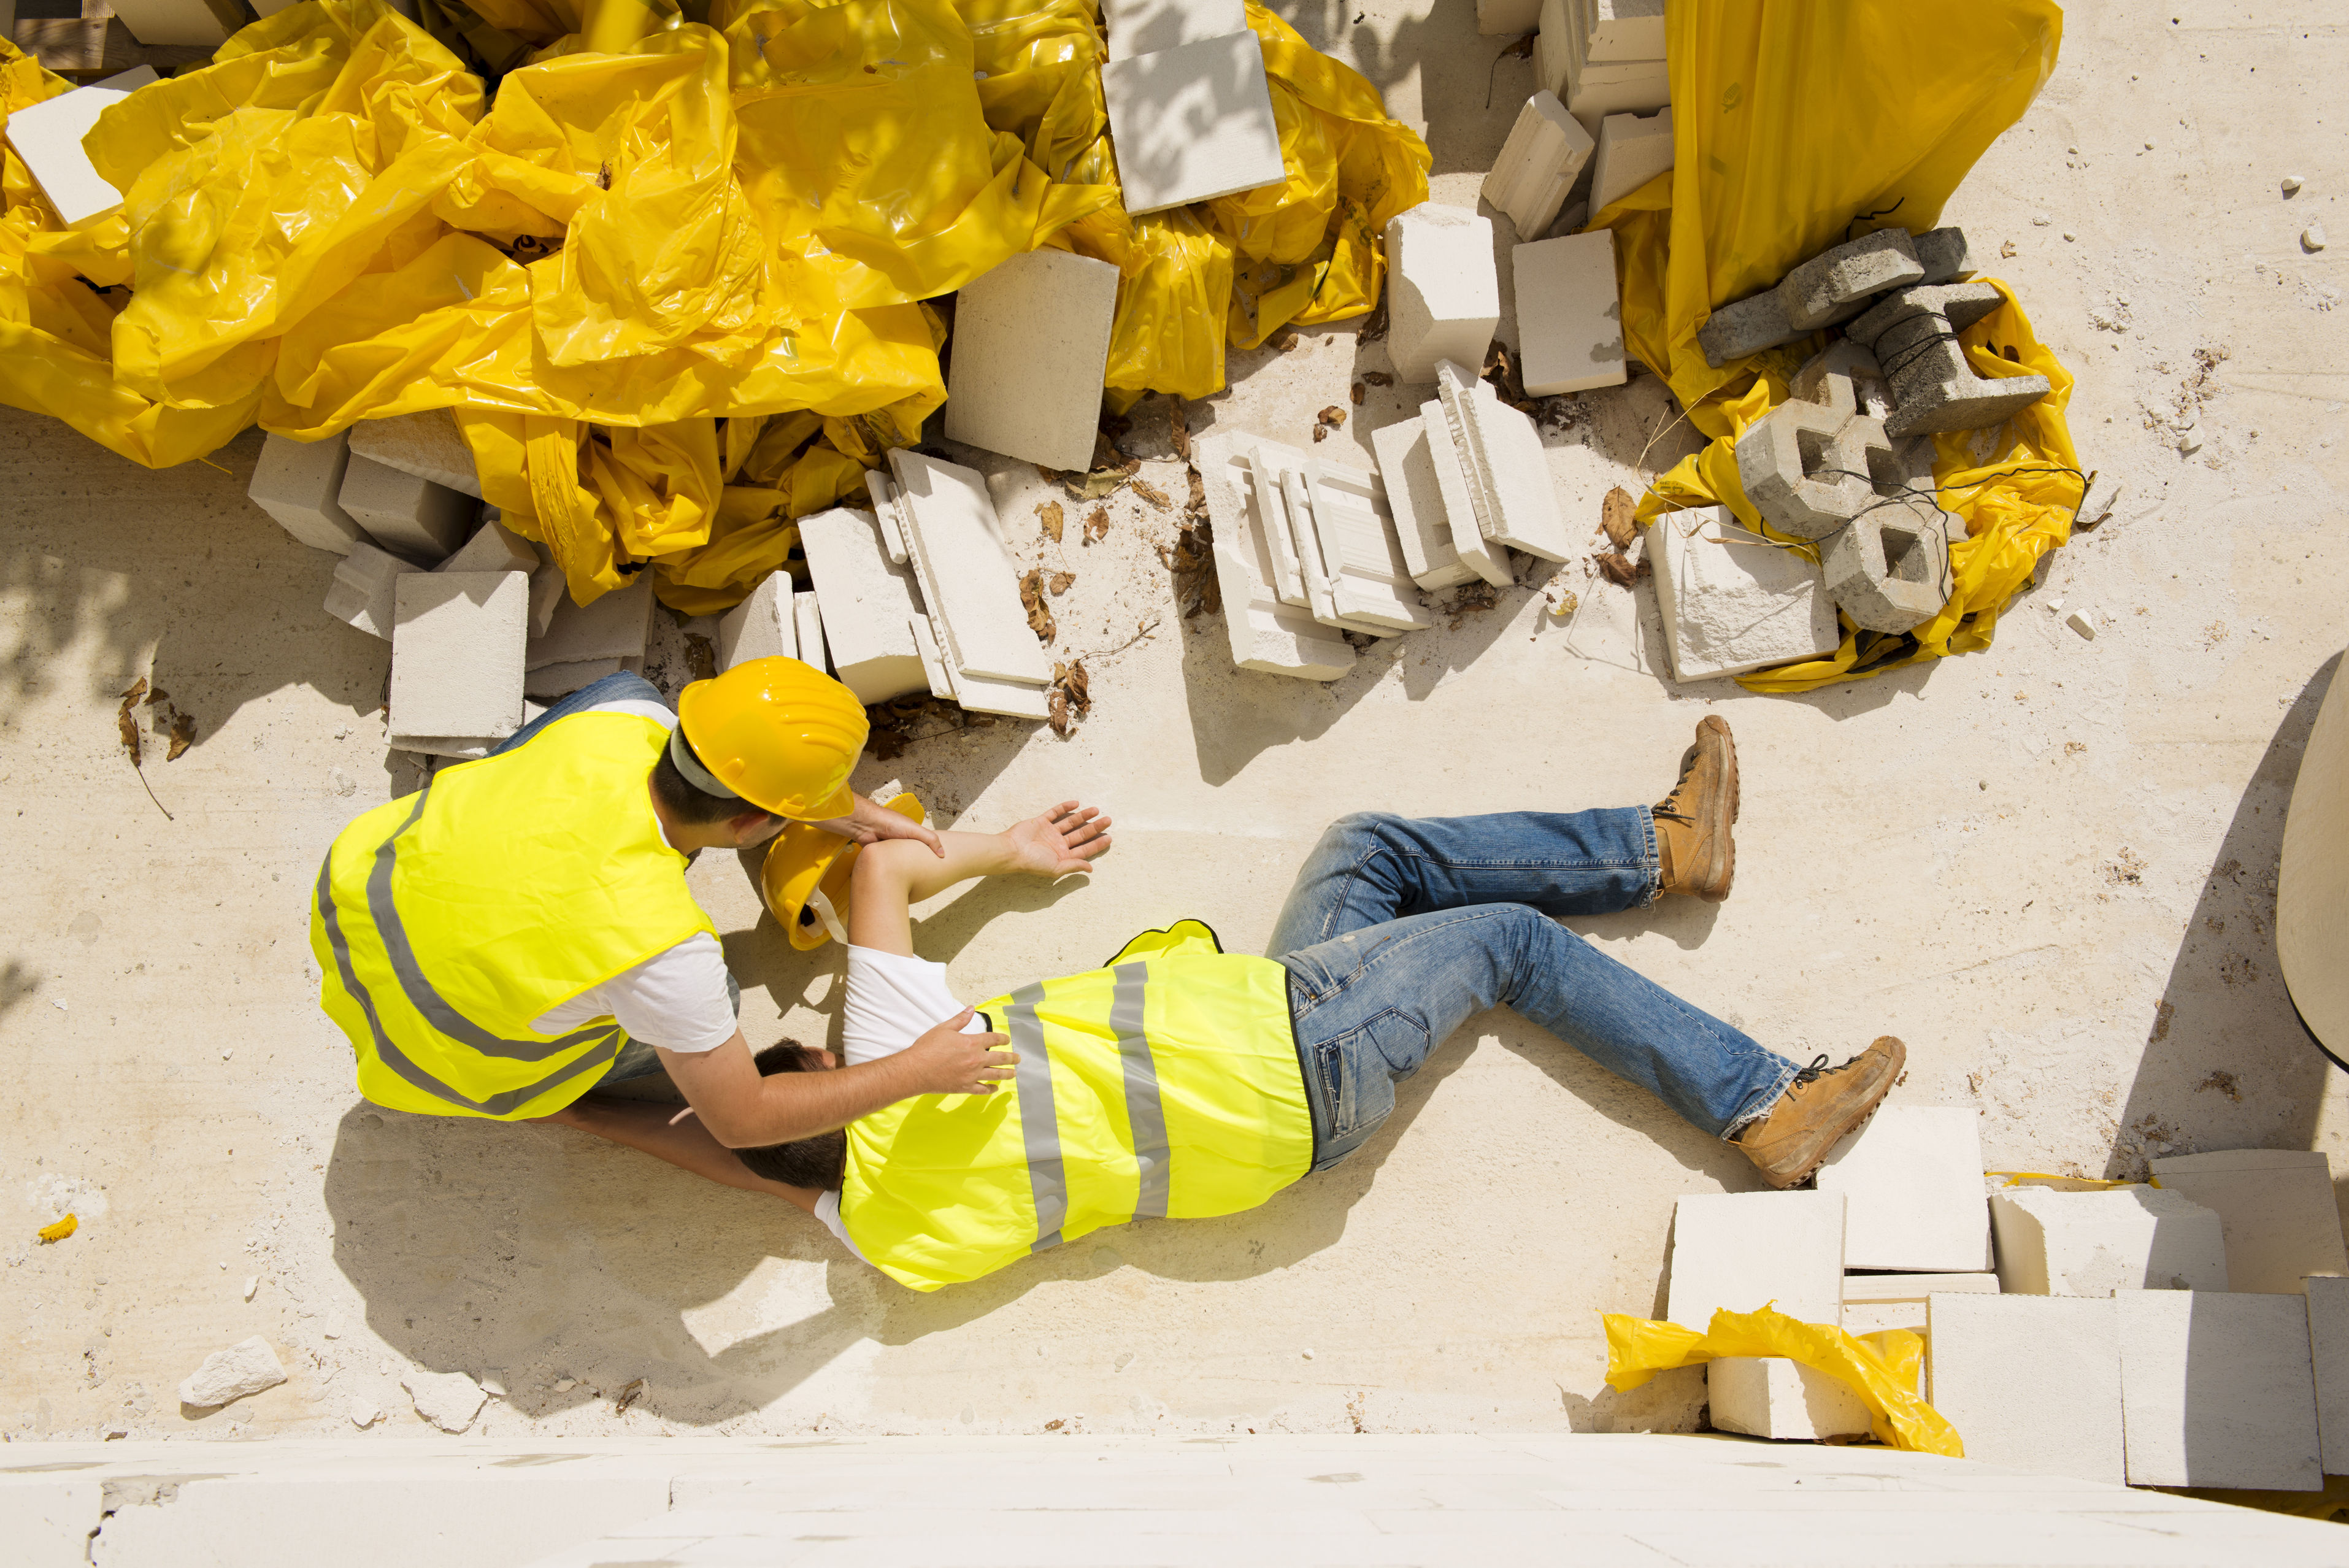 What Should You Know About Hiring a Construction Accident Lawyer in Melrose MA?